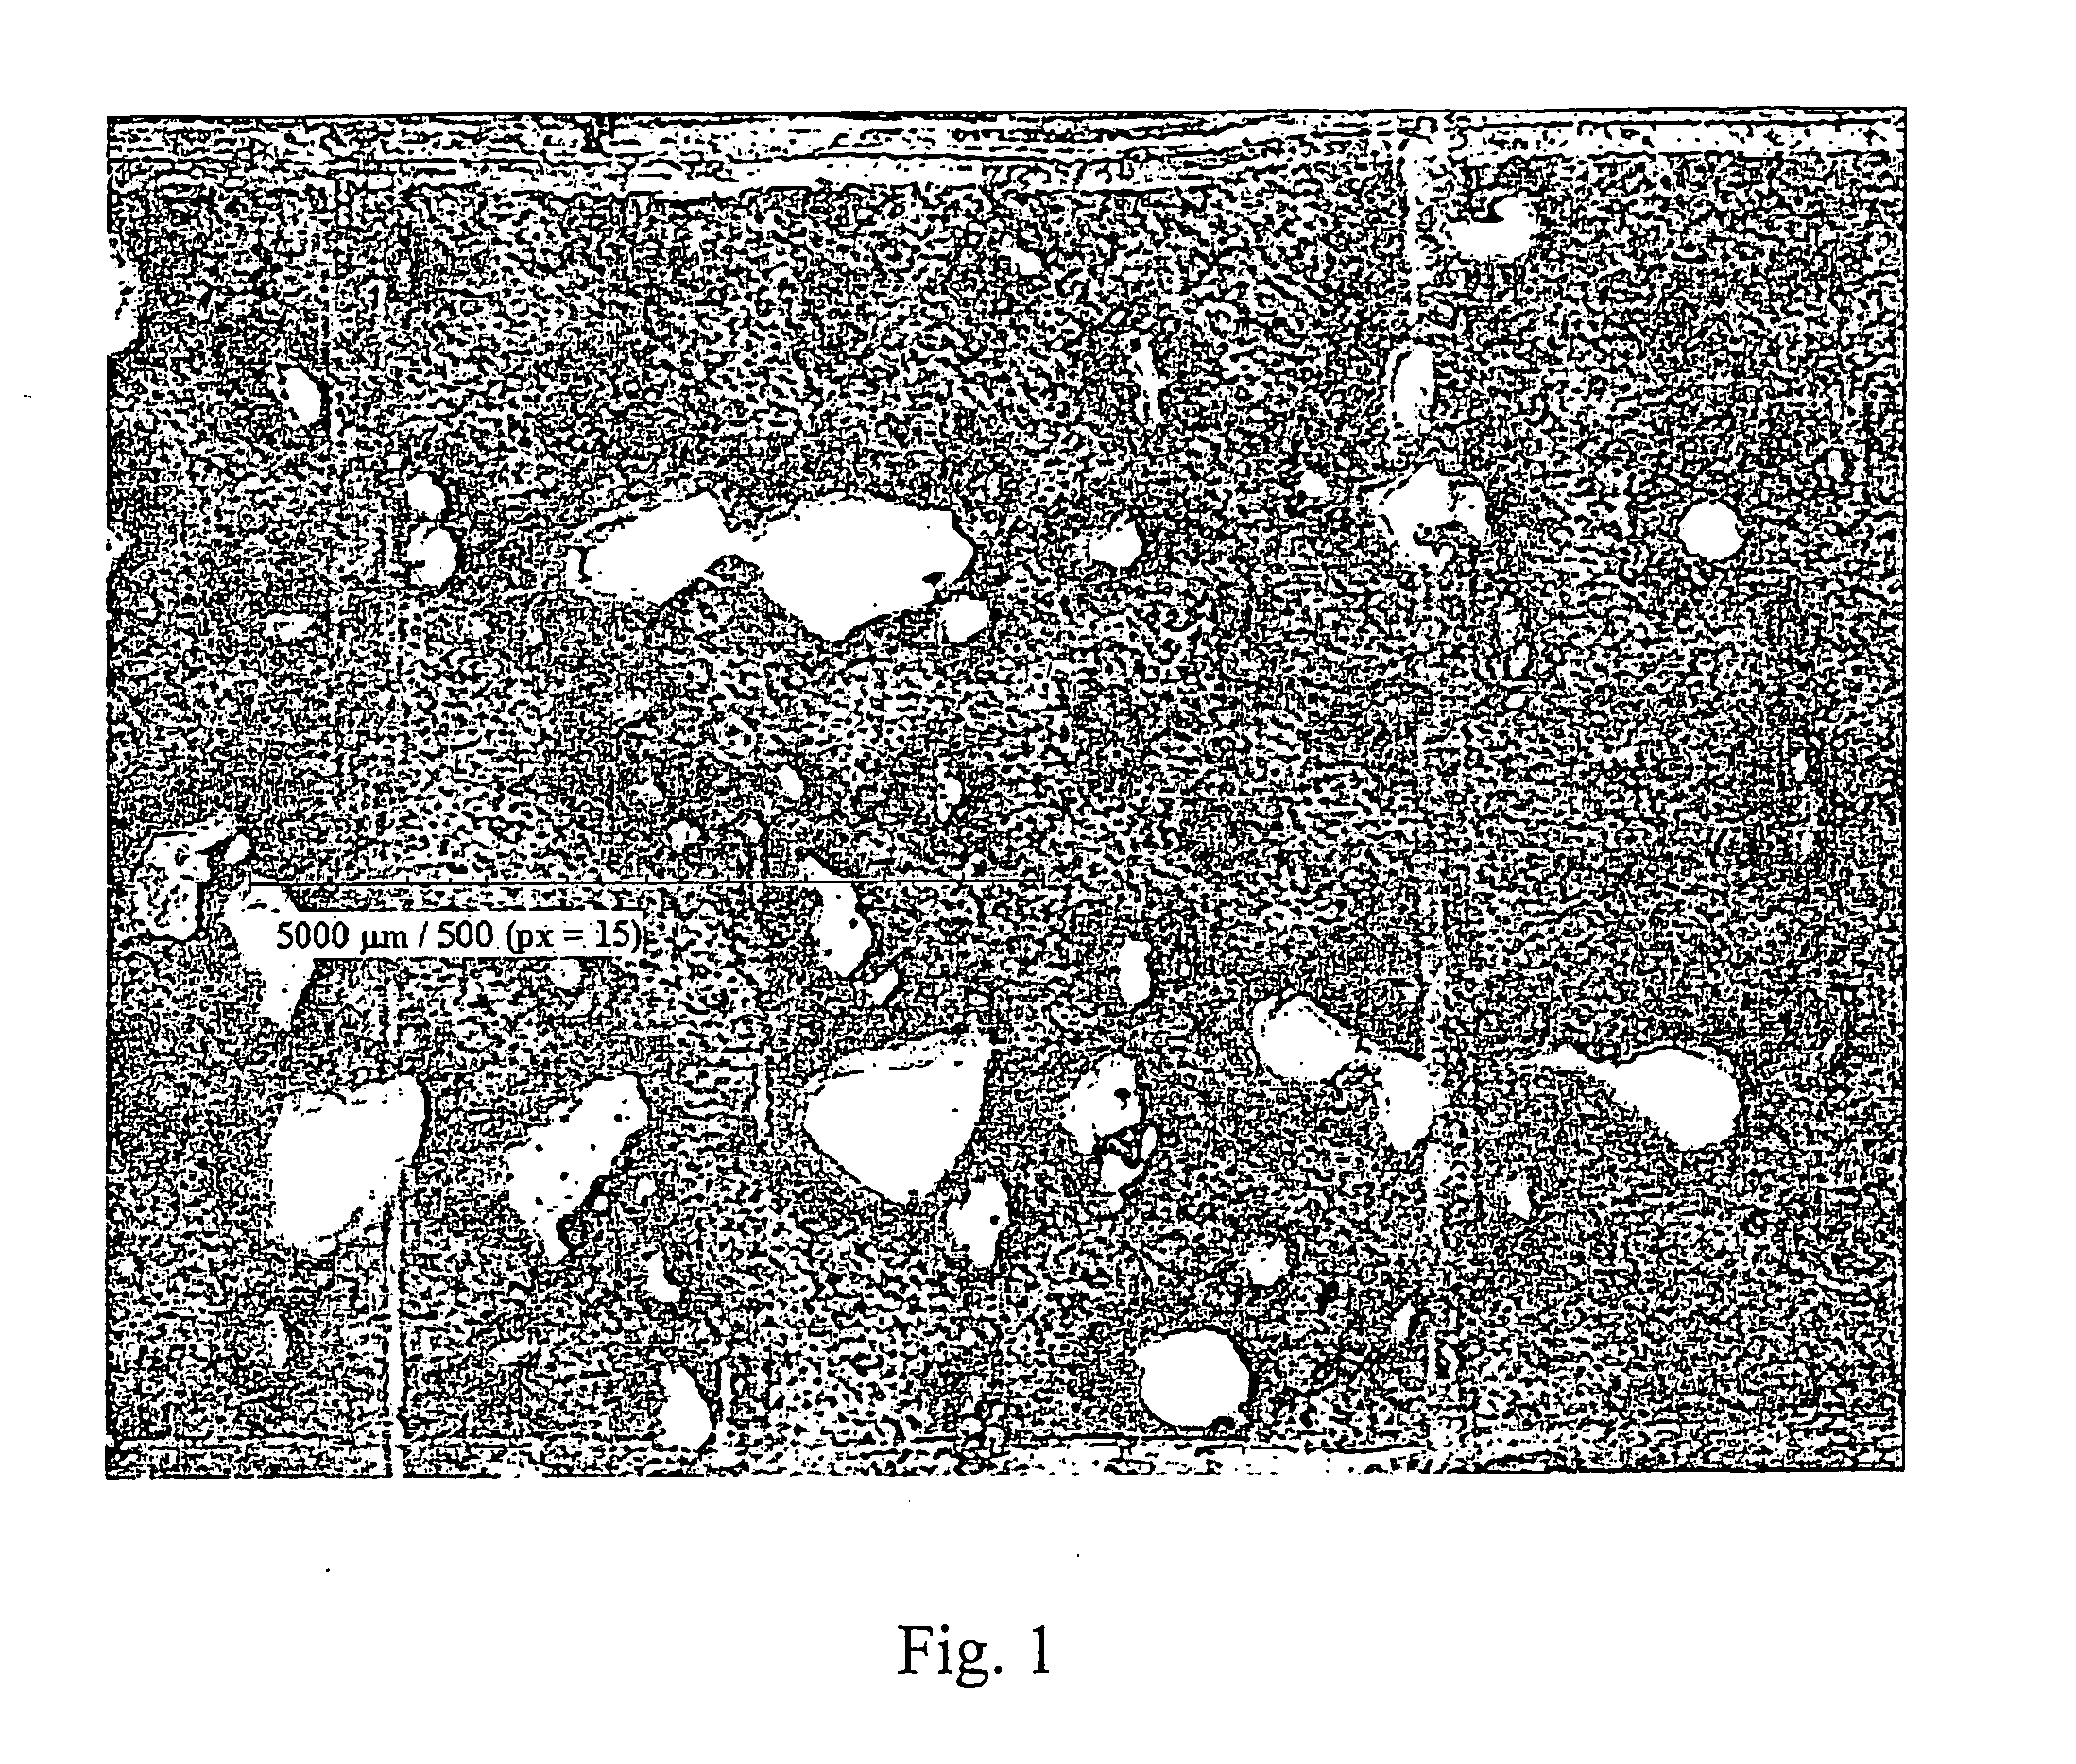 Print Substrate with a Scrambling Pattern for Concealing a Confidential Information Sequence